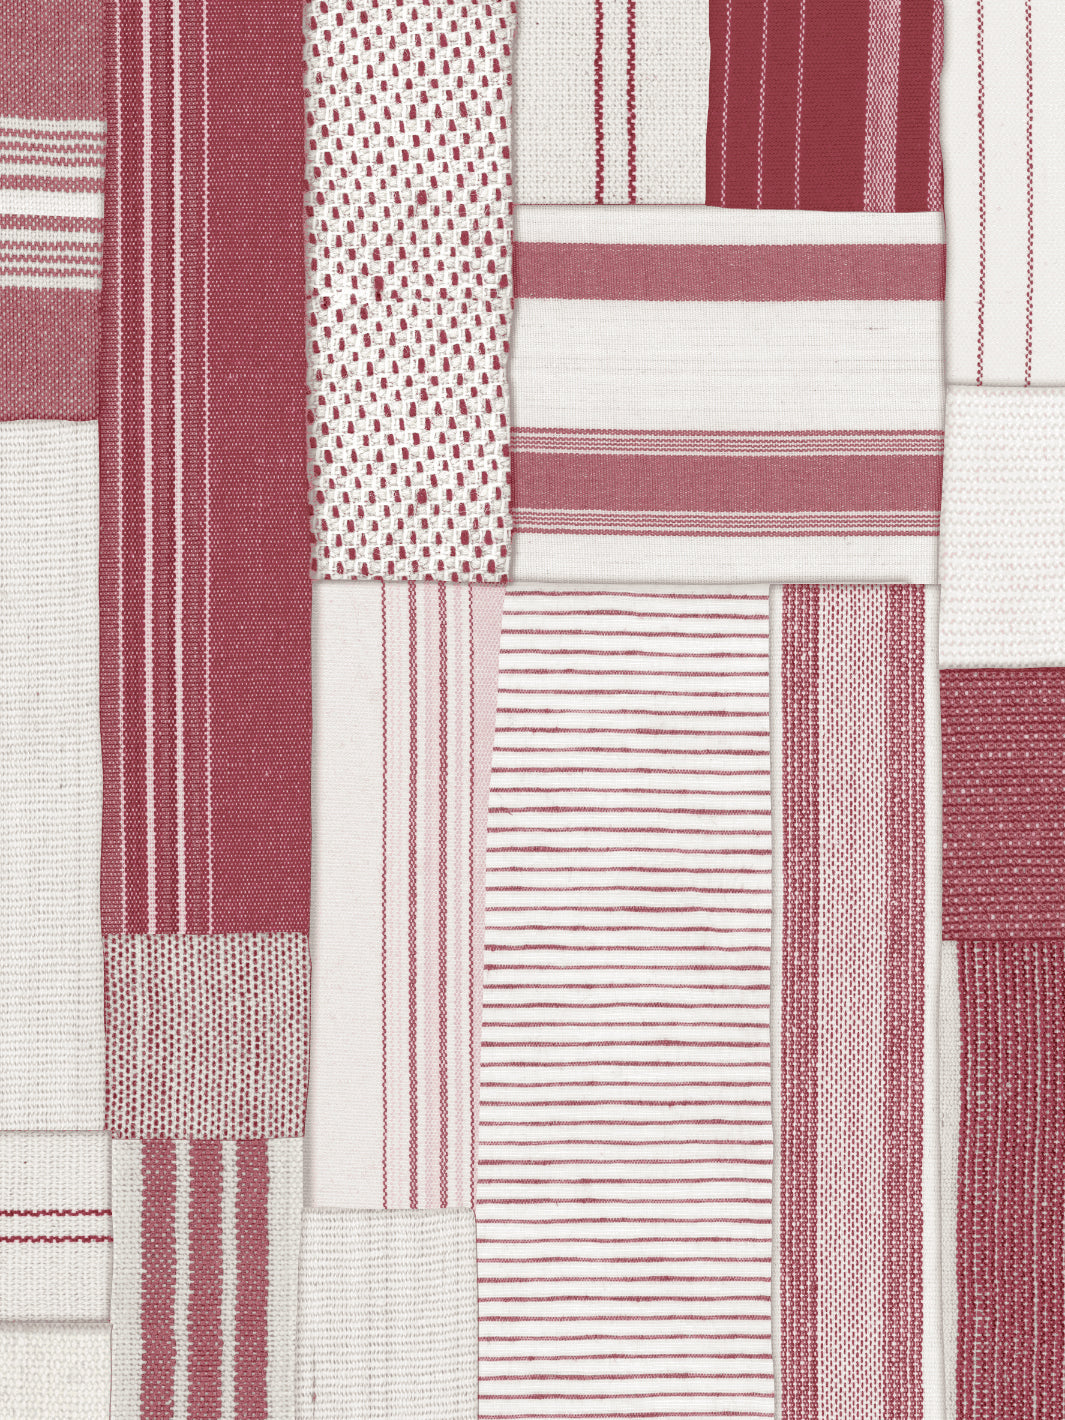 'Shirting Patchwork' Wallpaper by Chris Benz - Red